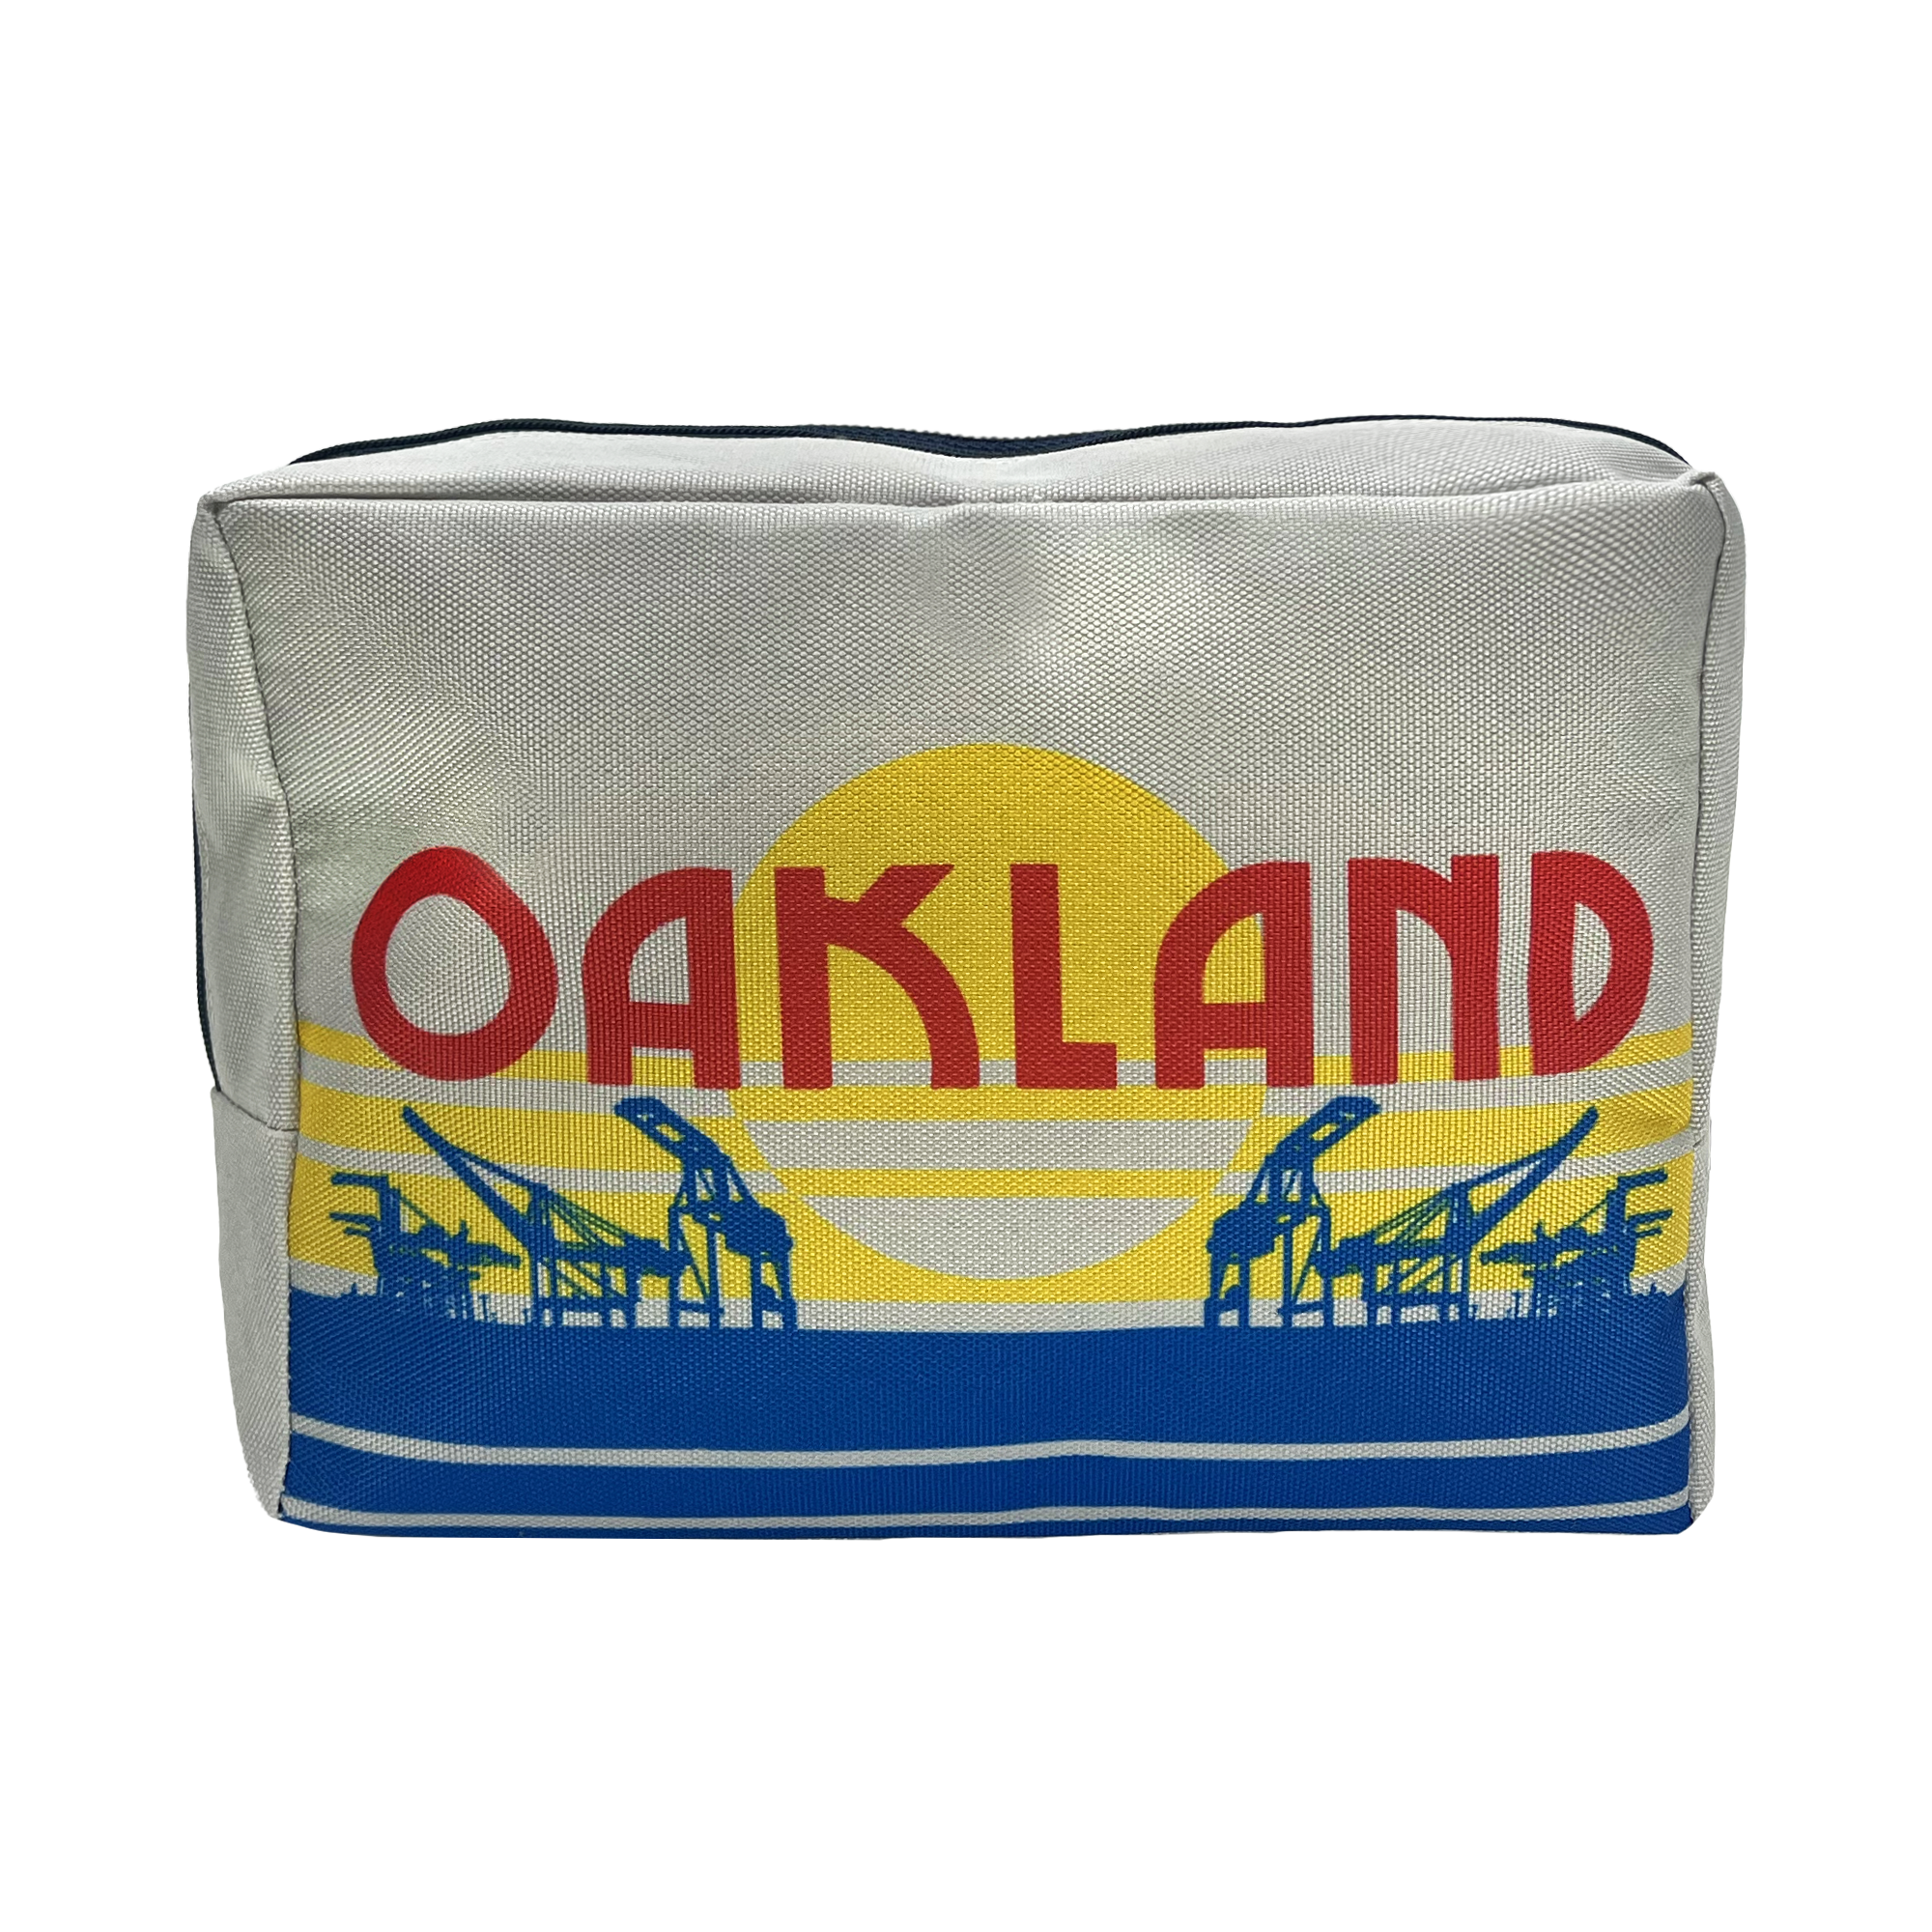 The front view of a polyester travel pouch with a red, blue, and yellow license plate design features an OAKLAND wordmark and graphic crane.